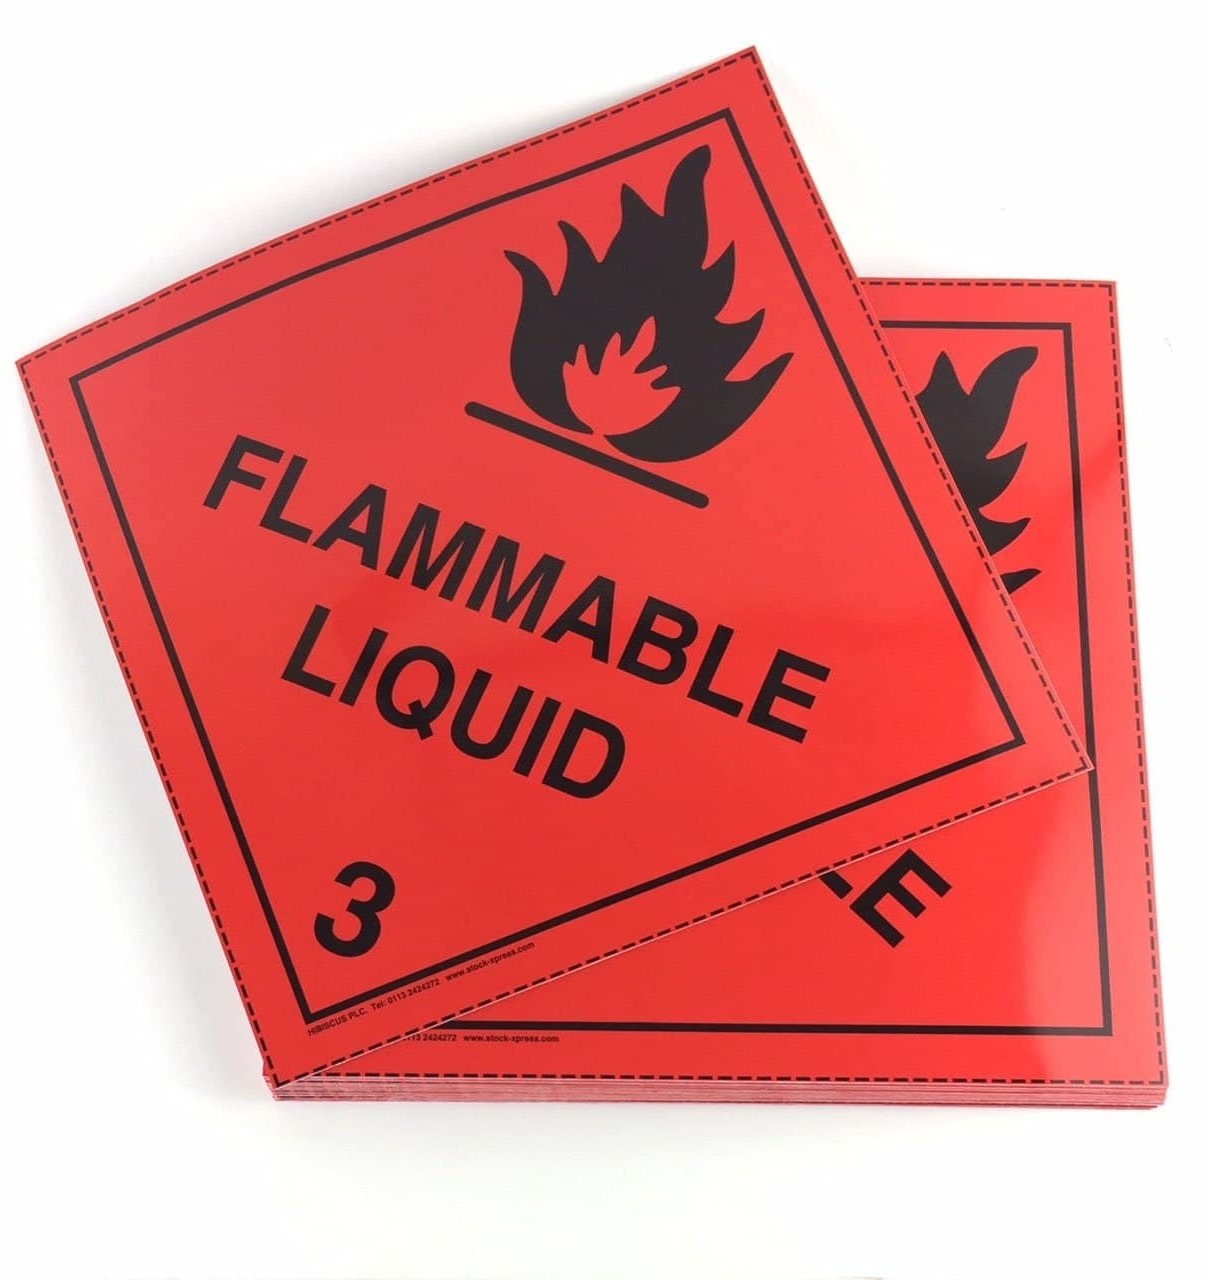 Class 3 - Flammable Liquids Flammable  liquids are defined by dangerous goods regulations as liquids, mixtures  of liquids or liquids containing solids in solution or suspension which  give off a flammable vapour (have a flash point) at temperatures of not  more than 60-65°C, liquids offered for transport at temperatures at or  above their flash point or substances transported at elevated  temperatures in a liquid state and which give off a flammable vapour at a  temperature at or below the maximum transport temperature.​ World Cargo Egypt are proficient in handling flammable liquids, Class 3 Dangerous Goods.  World Cargo Egypt  have the ability to service all customer requests pertaining to the  logistics of flammable liquids; packing, packaging, compliance, freight  forwarding and training. ​Reason for Regulation ​Flammable  liquids are capable of posing serious hazards due to their volatility,  combustibility and potential in causing or propagating severe  conflagrations. ​Sub-Divisions ​There are no subdivisions within Class 3, Flammable Liquids.​ Commonly Transported Flammable Liquids Acetone  / acetone oils, Adhesives, Paints / lacquers / varnishes, Alcohols,  Perfumery products, Gasoline / Petrol, Diesel fuel, Aviation fuel,  Liquid bio-fuels, Coal tar / coal tar distillates, Petroleum crude  oil,Petroleum distillates, Gas oil, Shale oil, Heating oil, Kerosene,  Resins, Tars, Turpentine, Carbamate insecticides, Organochlorine  pesticides,Organophosphorus pesticides, Copper based pesticides, Esters,  Ethers, Ethanol, Benzene, Butanols, Dichloropropenes, Diethyl ether,  Isobutanols, Isopropyls, Methanol, Octanes.